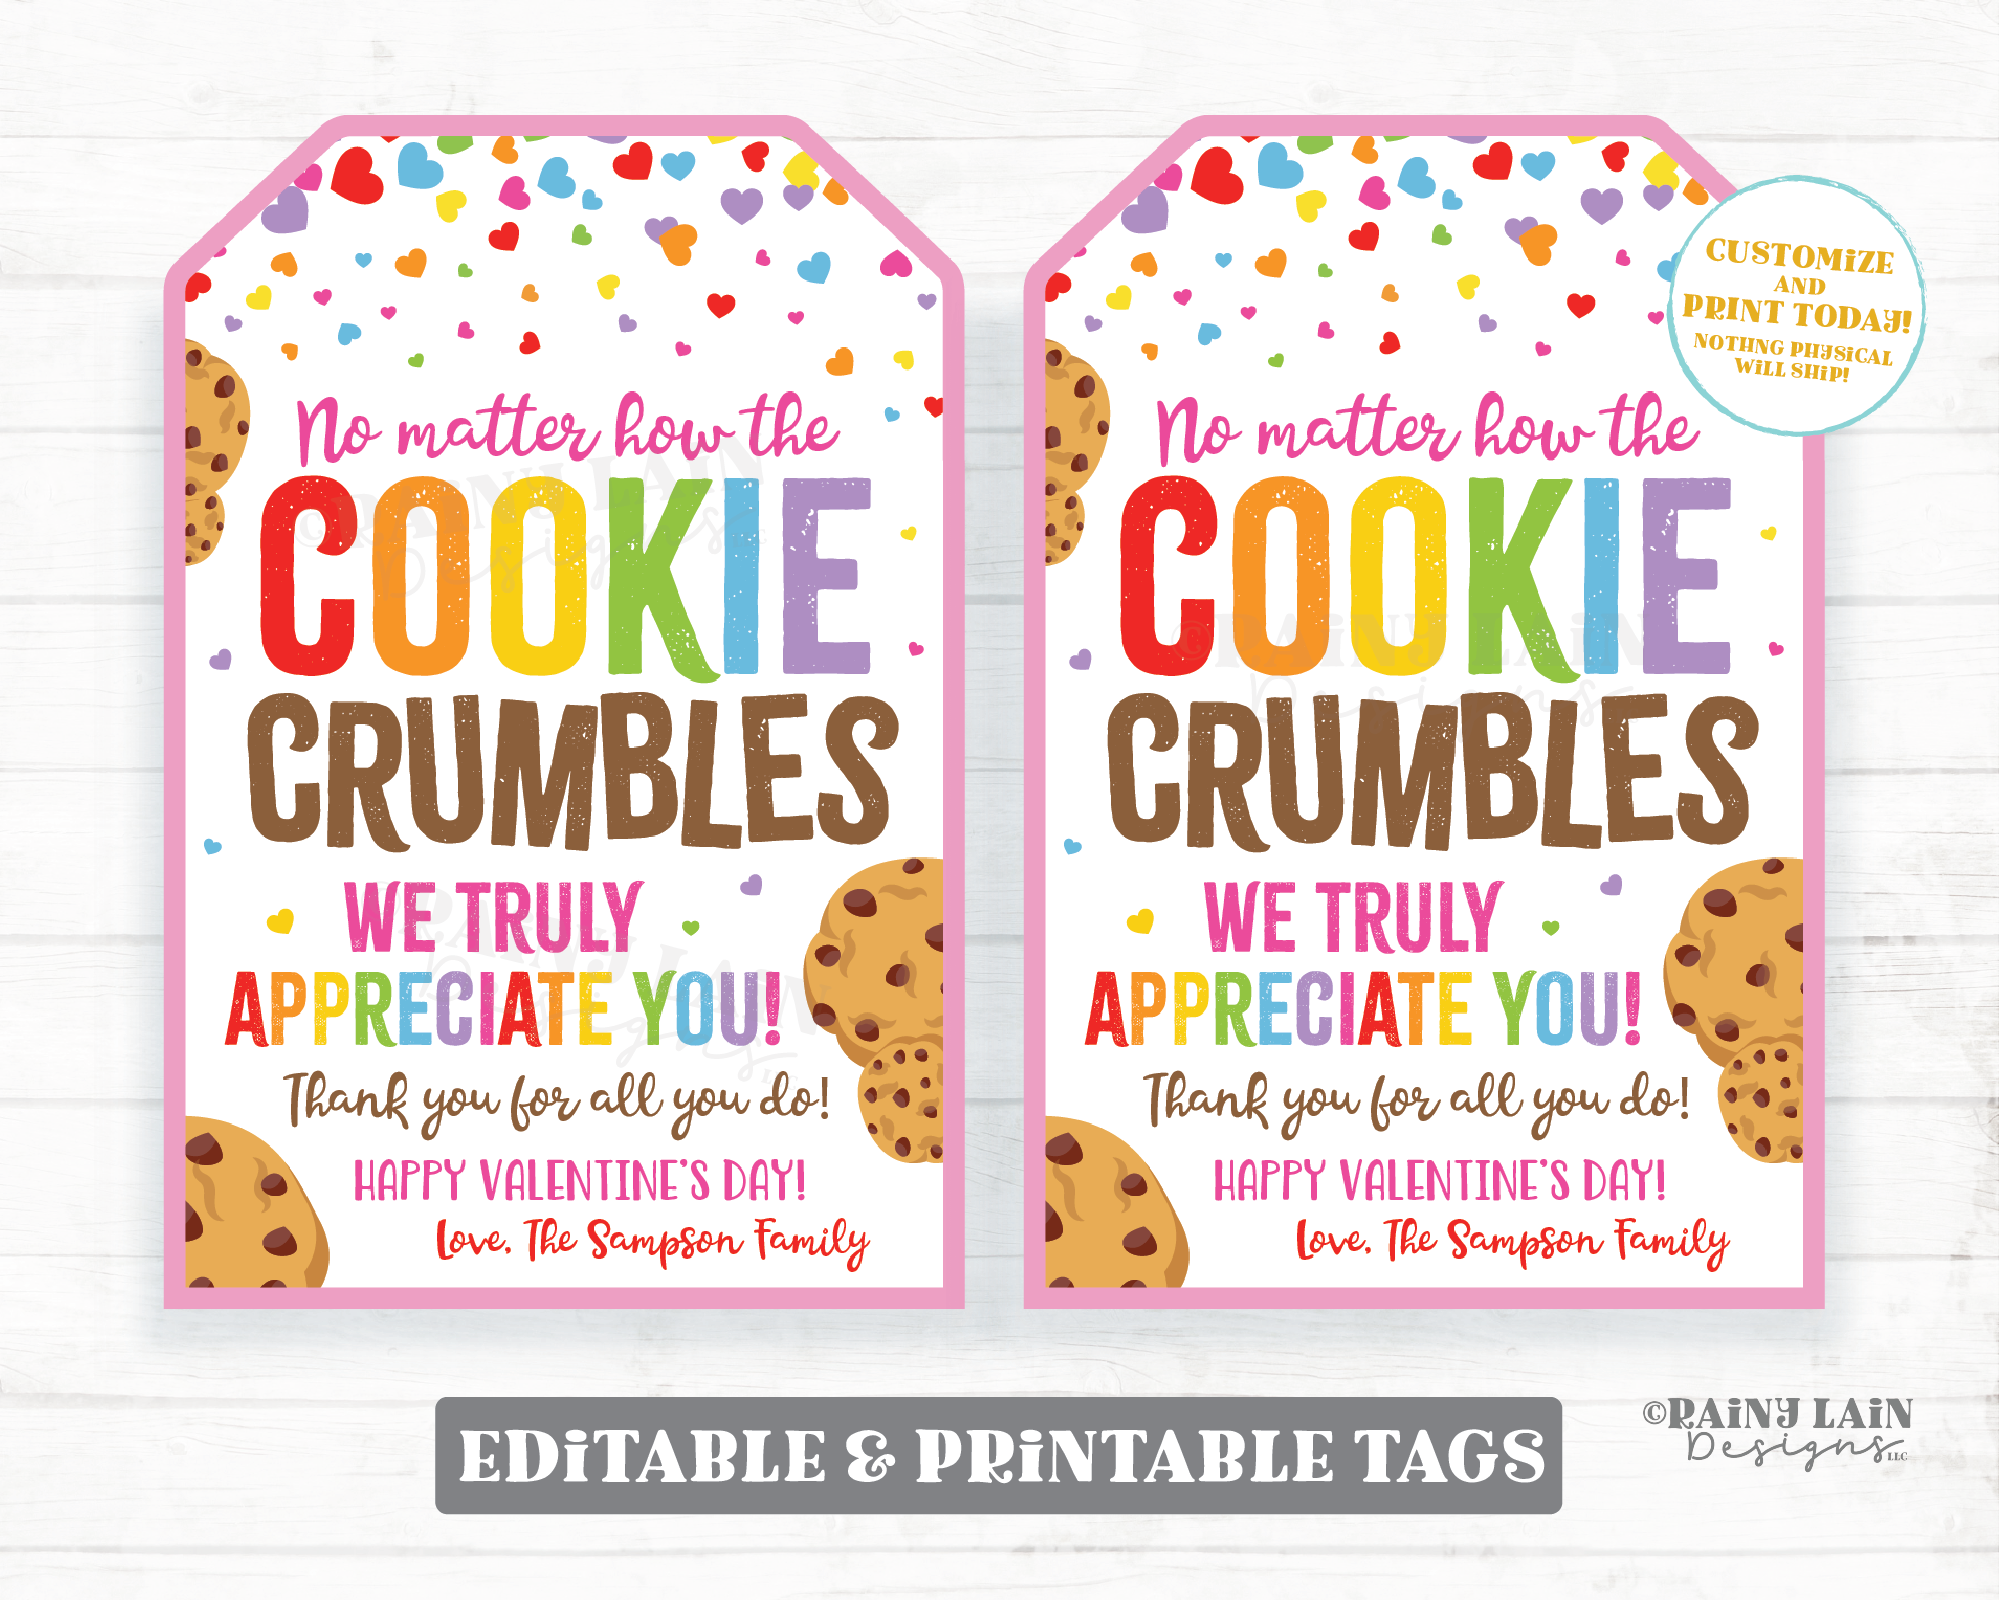 Valentine's Day Tag No Matter How the Cookie Crumbles Appreciation Cookie Gift Tag Employee Staff Teacher Thank you Homemade Editable Tag